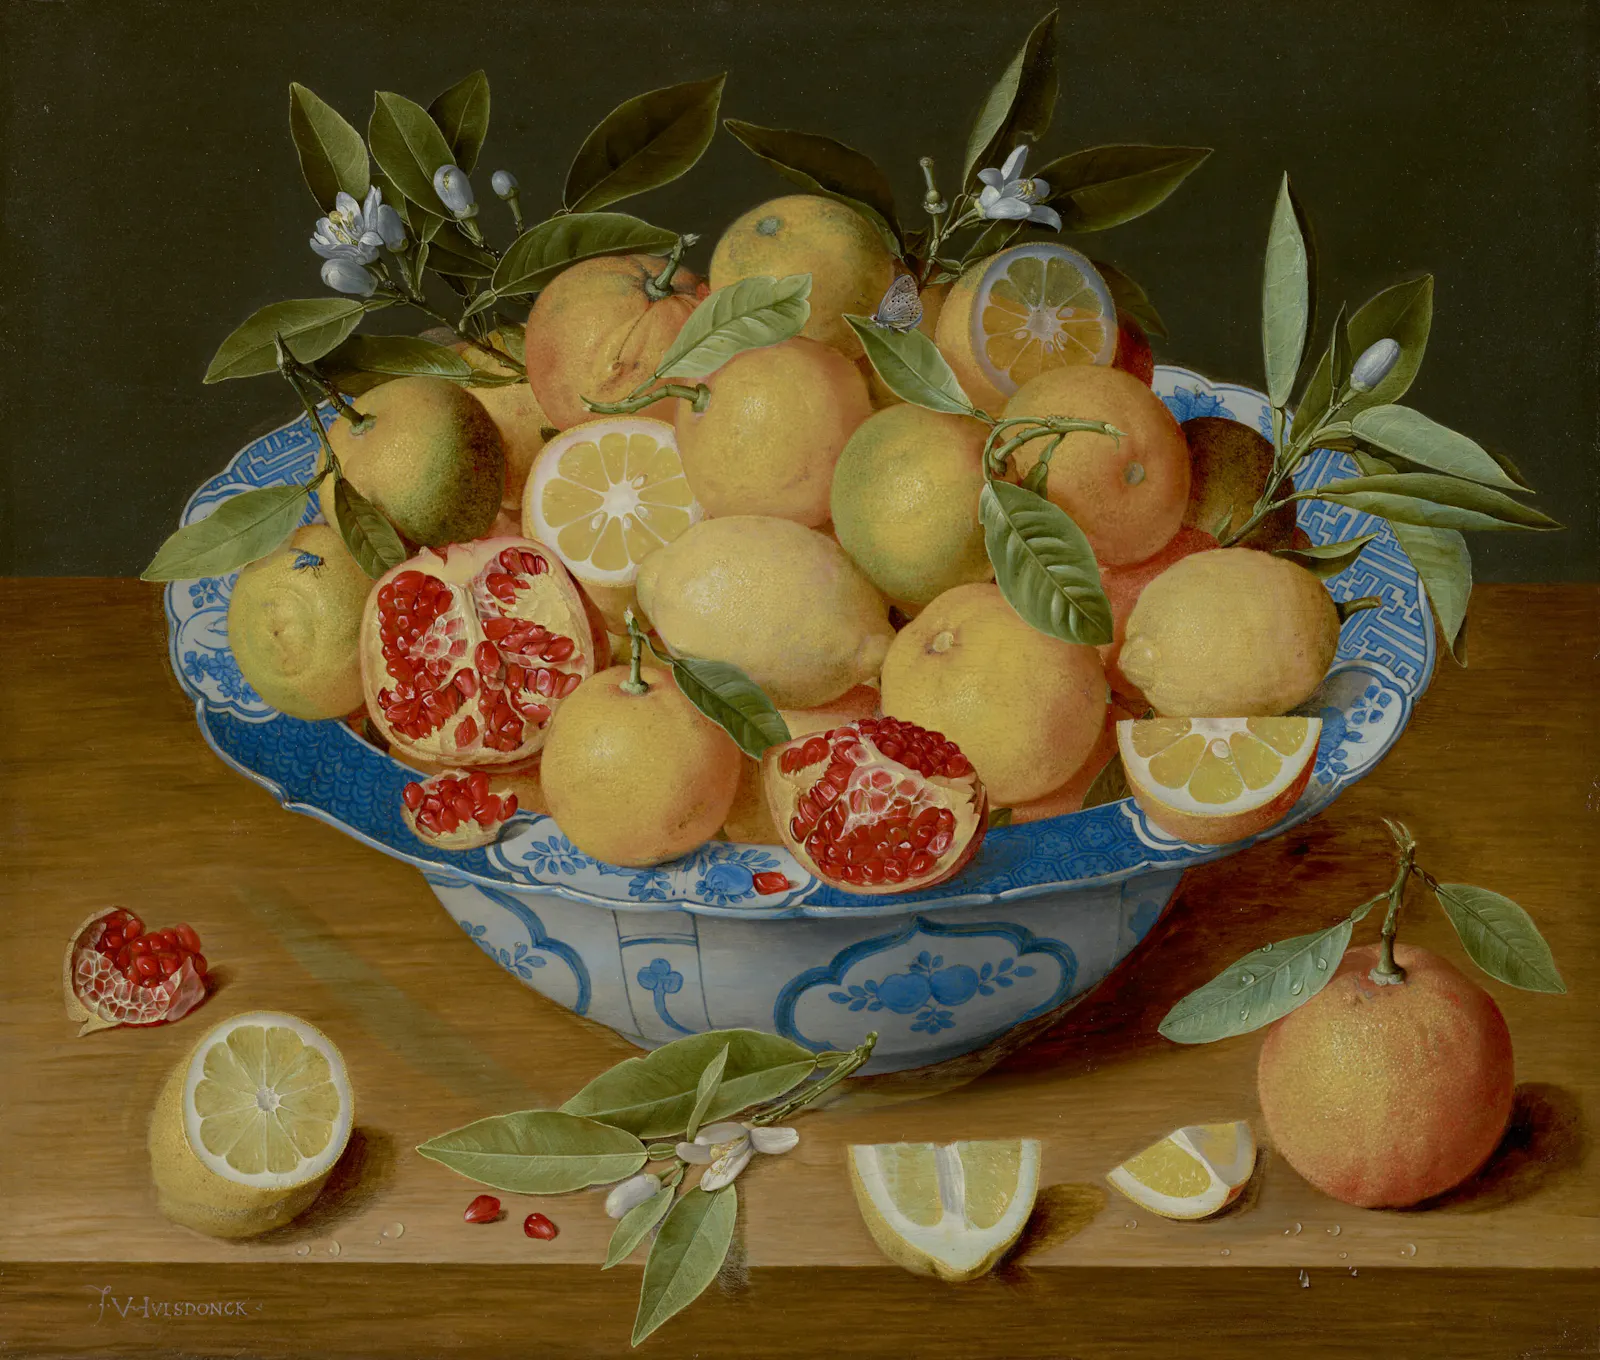 Jacob van Hulsdonck (Flemish, 1582 - 1647): Still Life with Lemons, Oranges, and a Pomegranate, about 1620–1630
Oil on panel, The J. Paul Getty Museum, Los Angeles, 86.PB.538